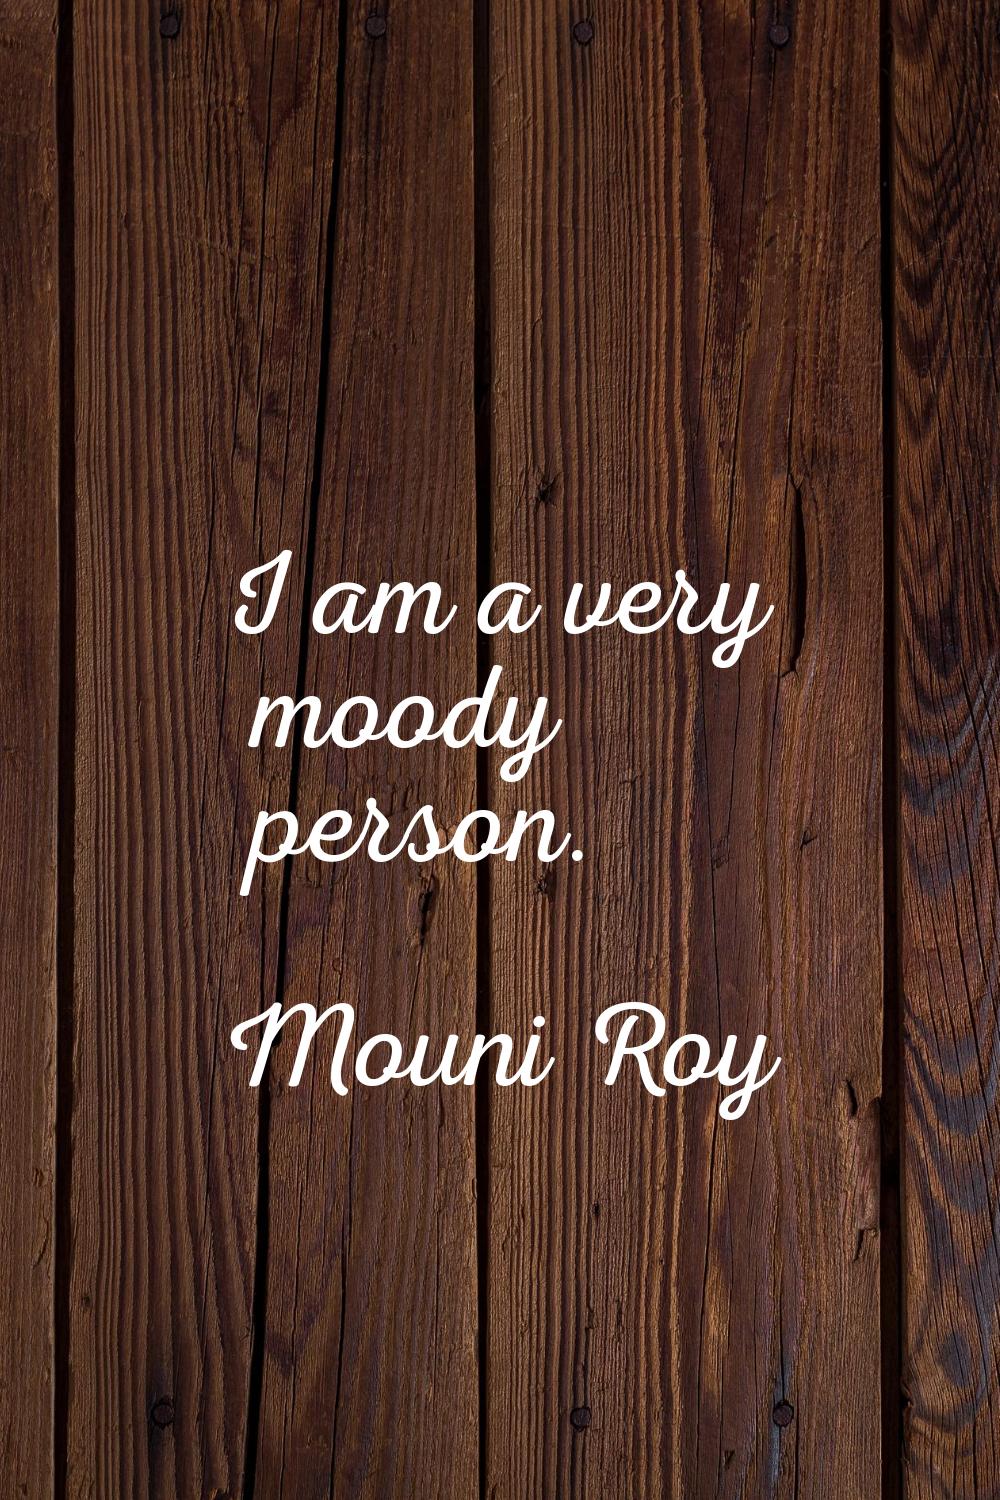 I am a very moody person.